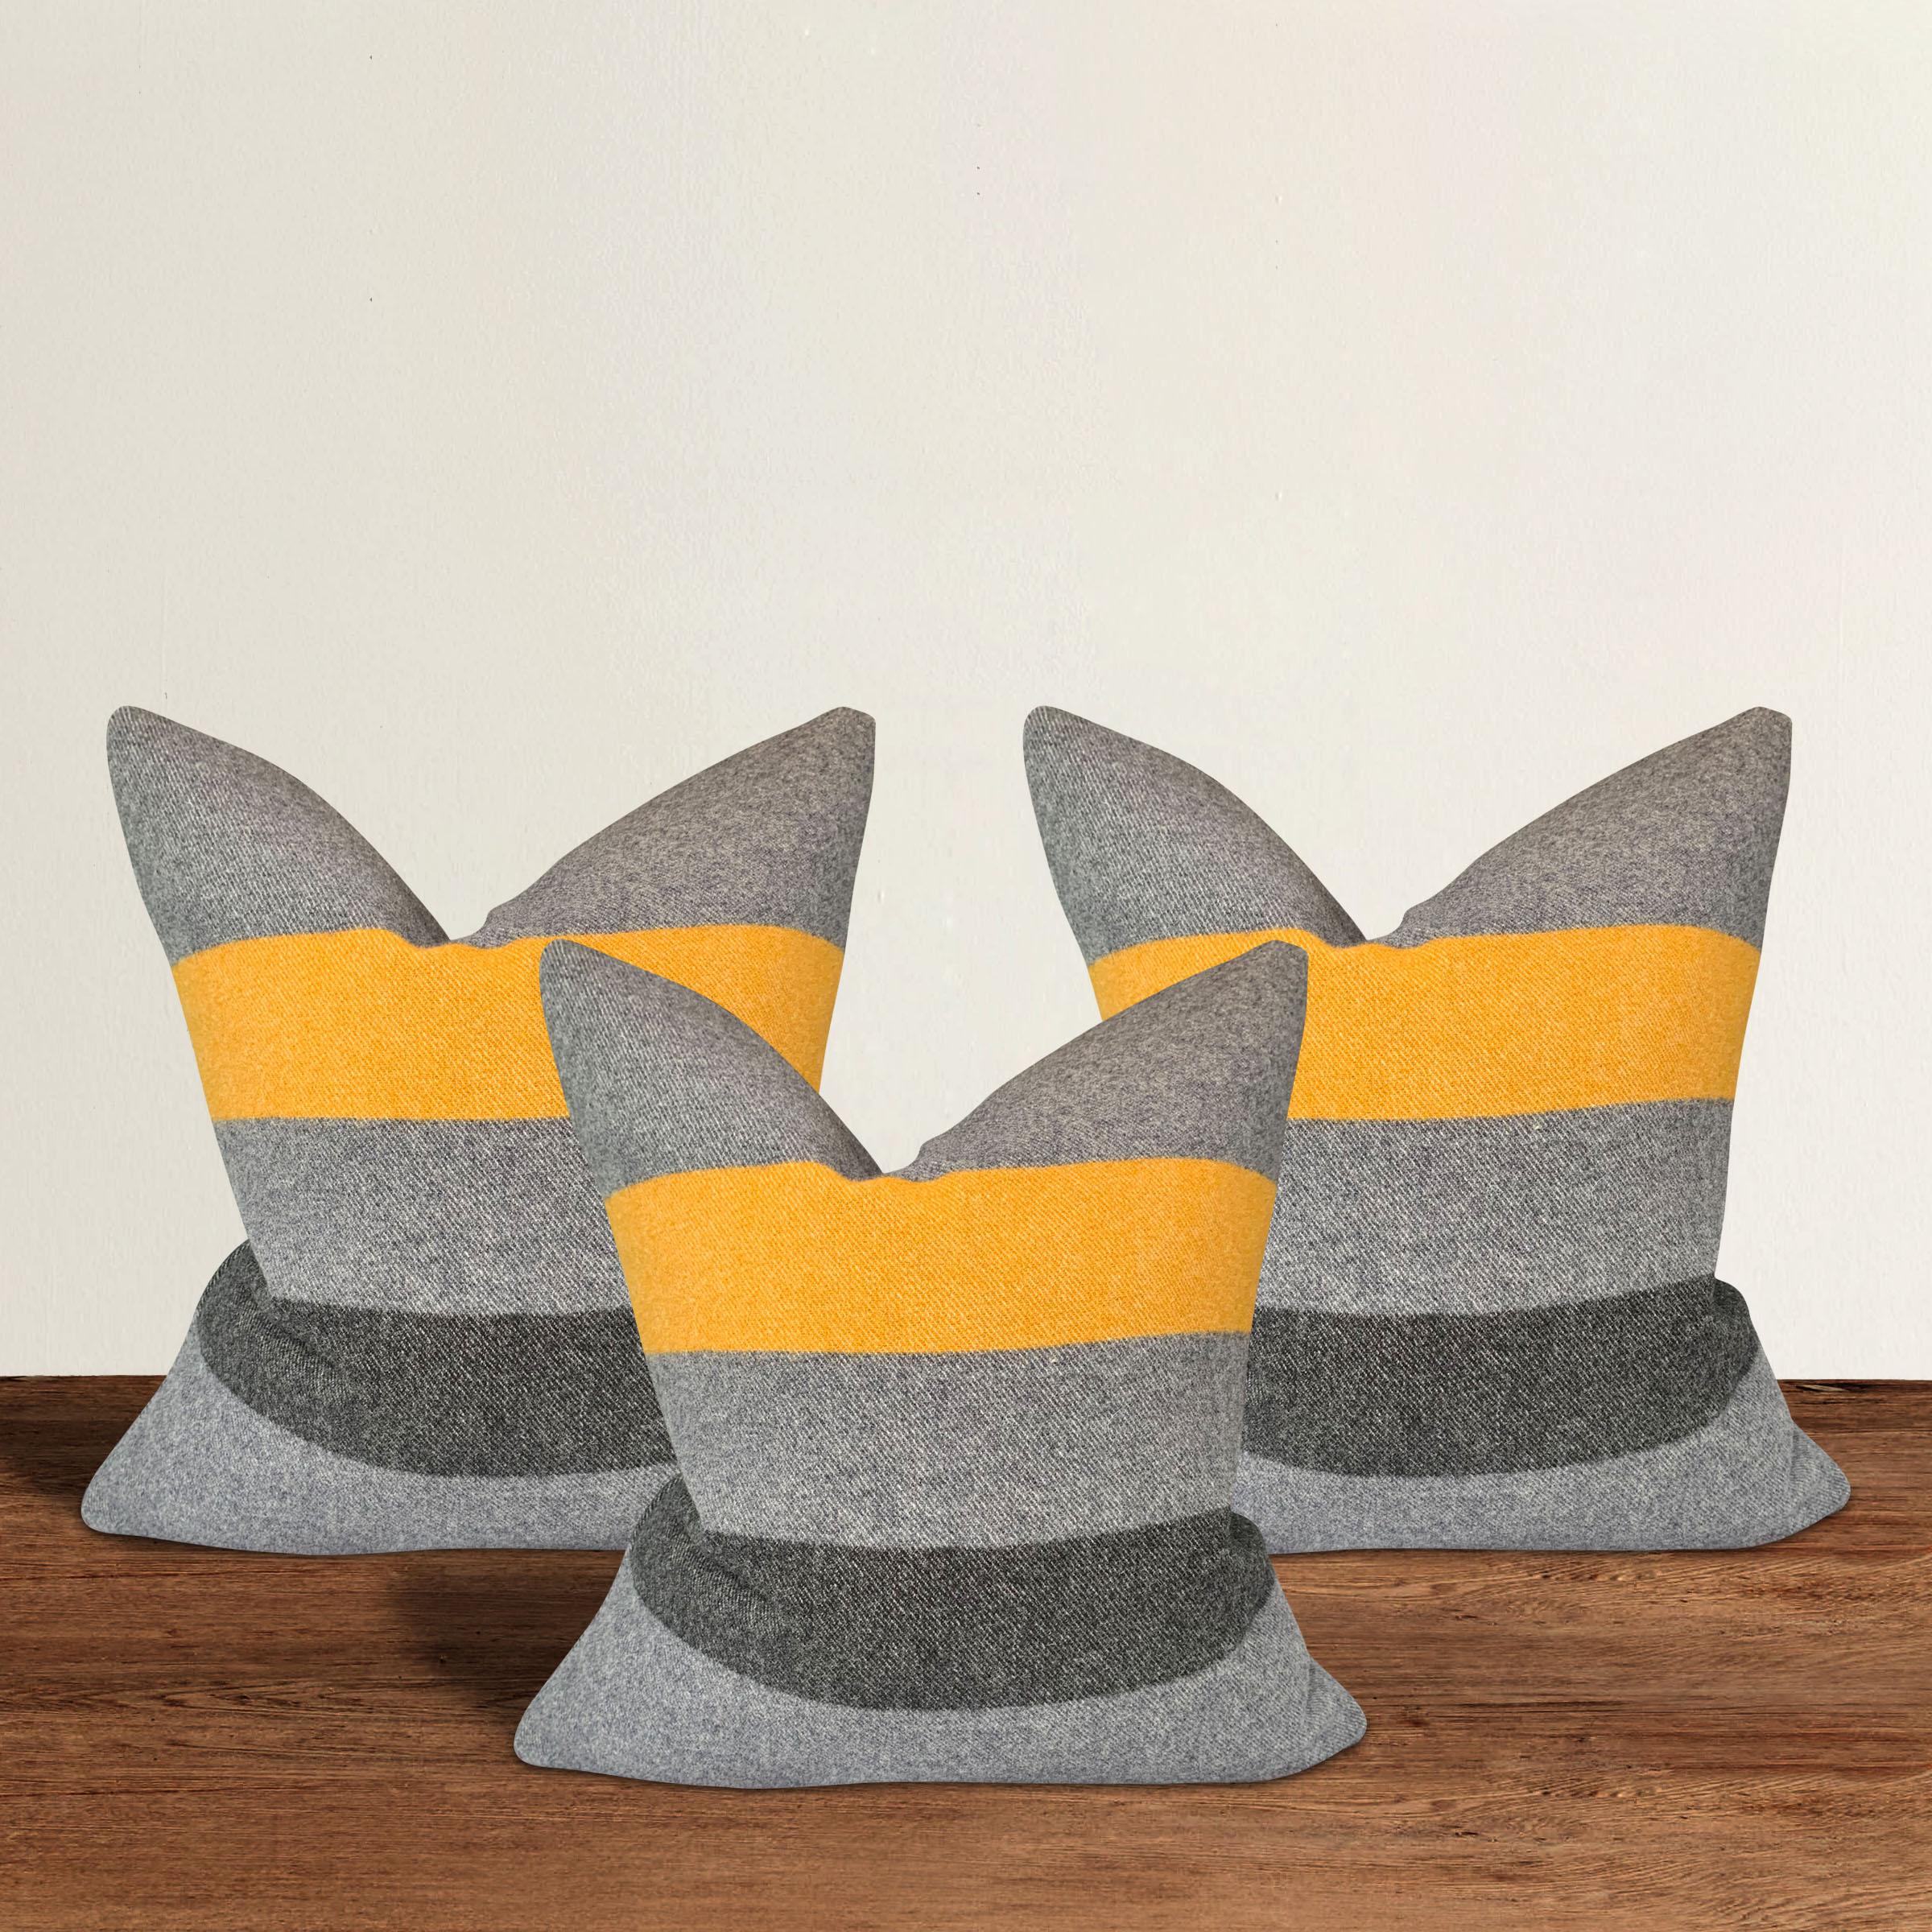 A wonderful set of three pillows with gold and black stripes against a gray background, custom made from wool sourced from Faribault Woolen Mills in Faribault, Minnesota. Faribault Woolen Mills was founded in 1865 along the Cannon River in